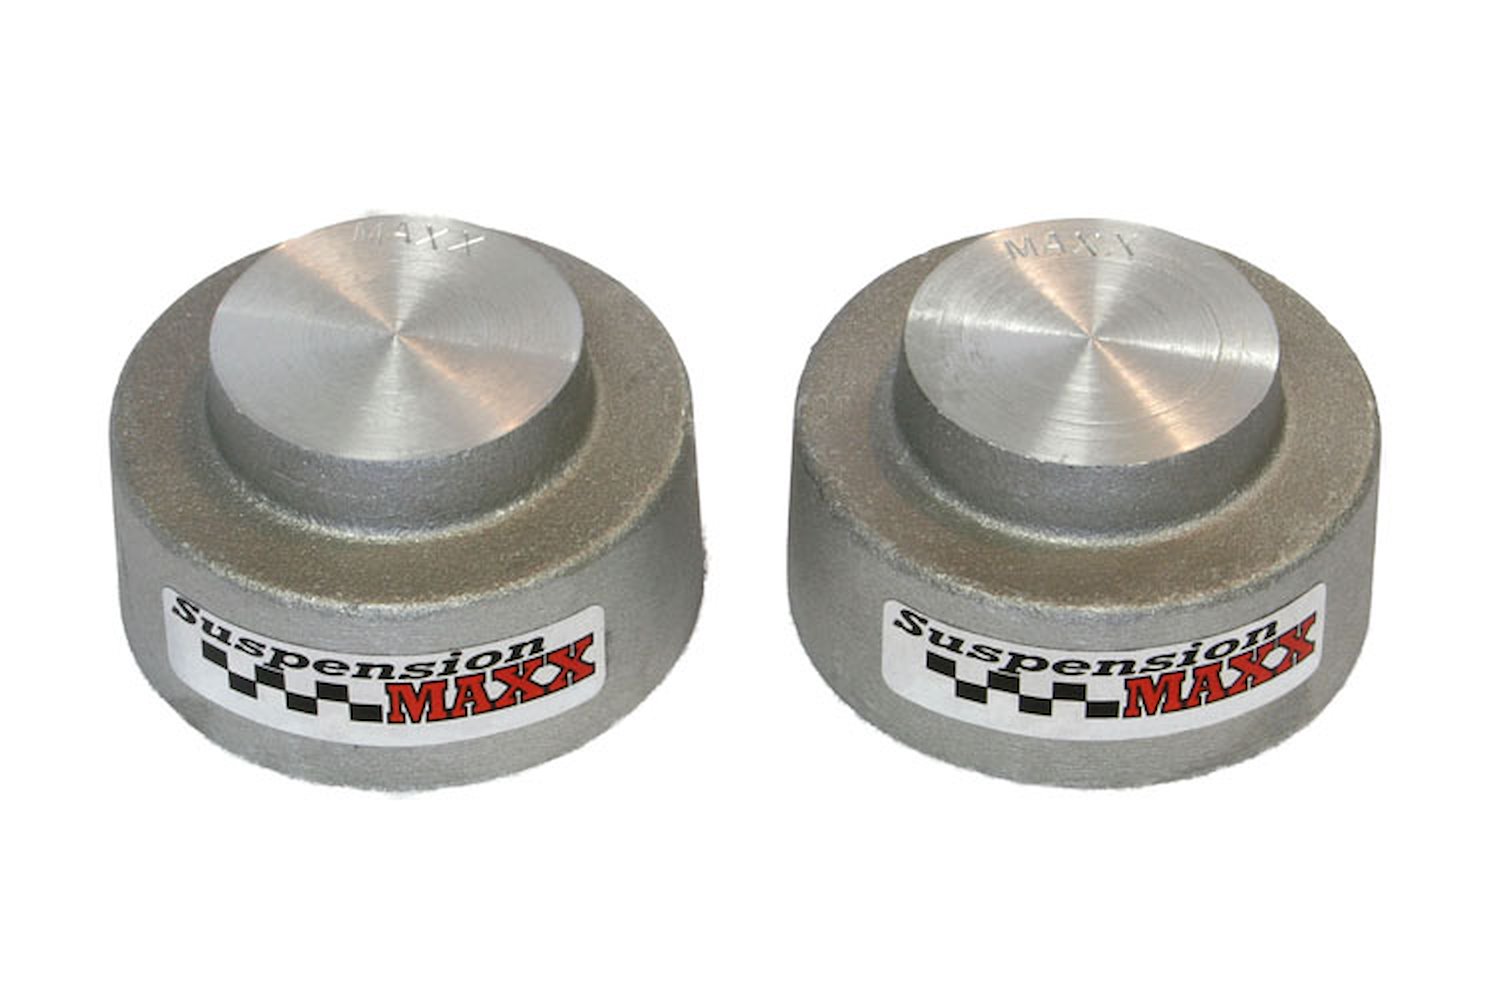 SMX-15150M MAXXStak 1.500 in. Rear Leveling Spacer Fits Select 2001-2020 Cadillac, Chevy, GMC Models [Magnetic Ride Control]